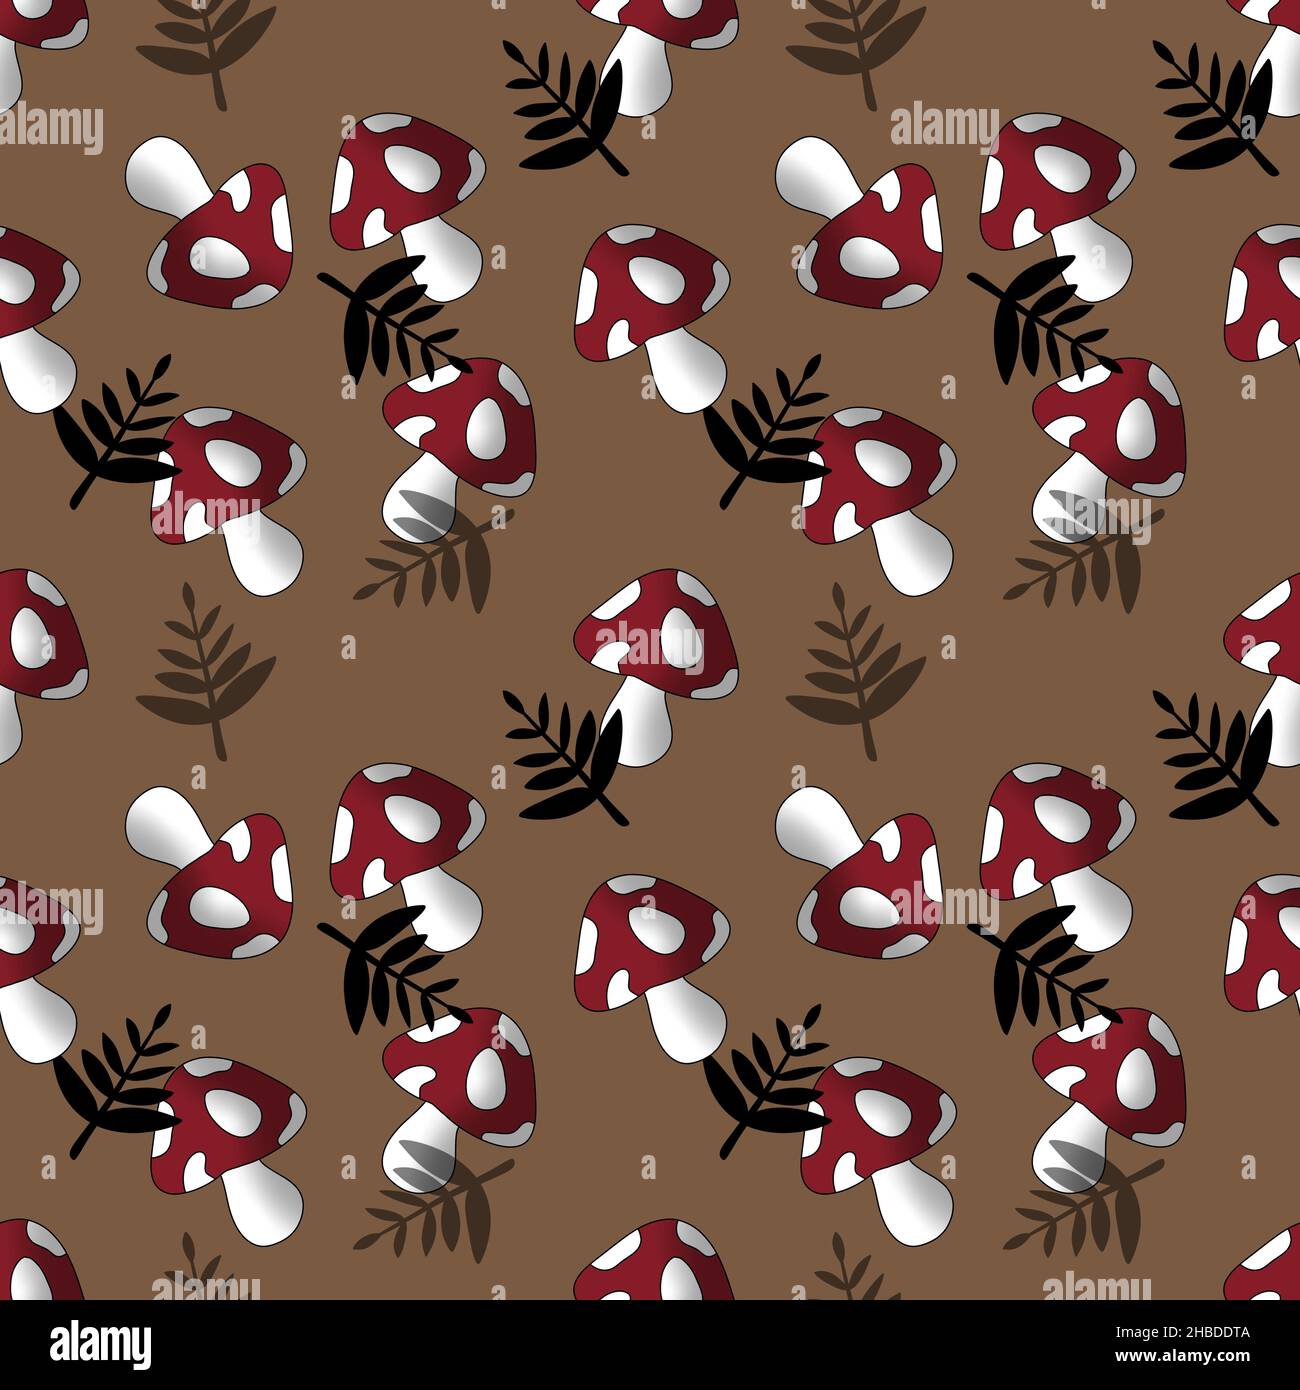 Seamless pattern with mushrooms on brown background  Stock Photo